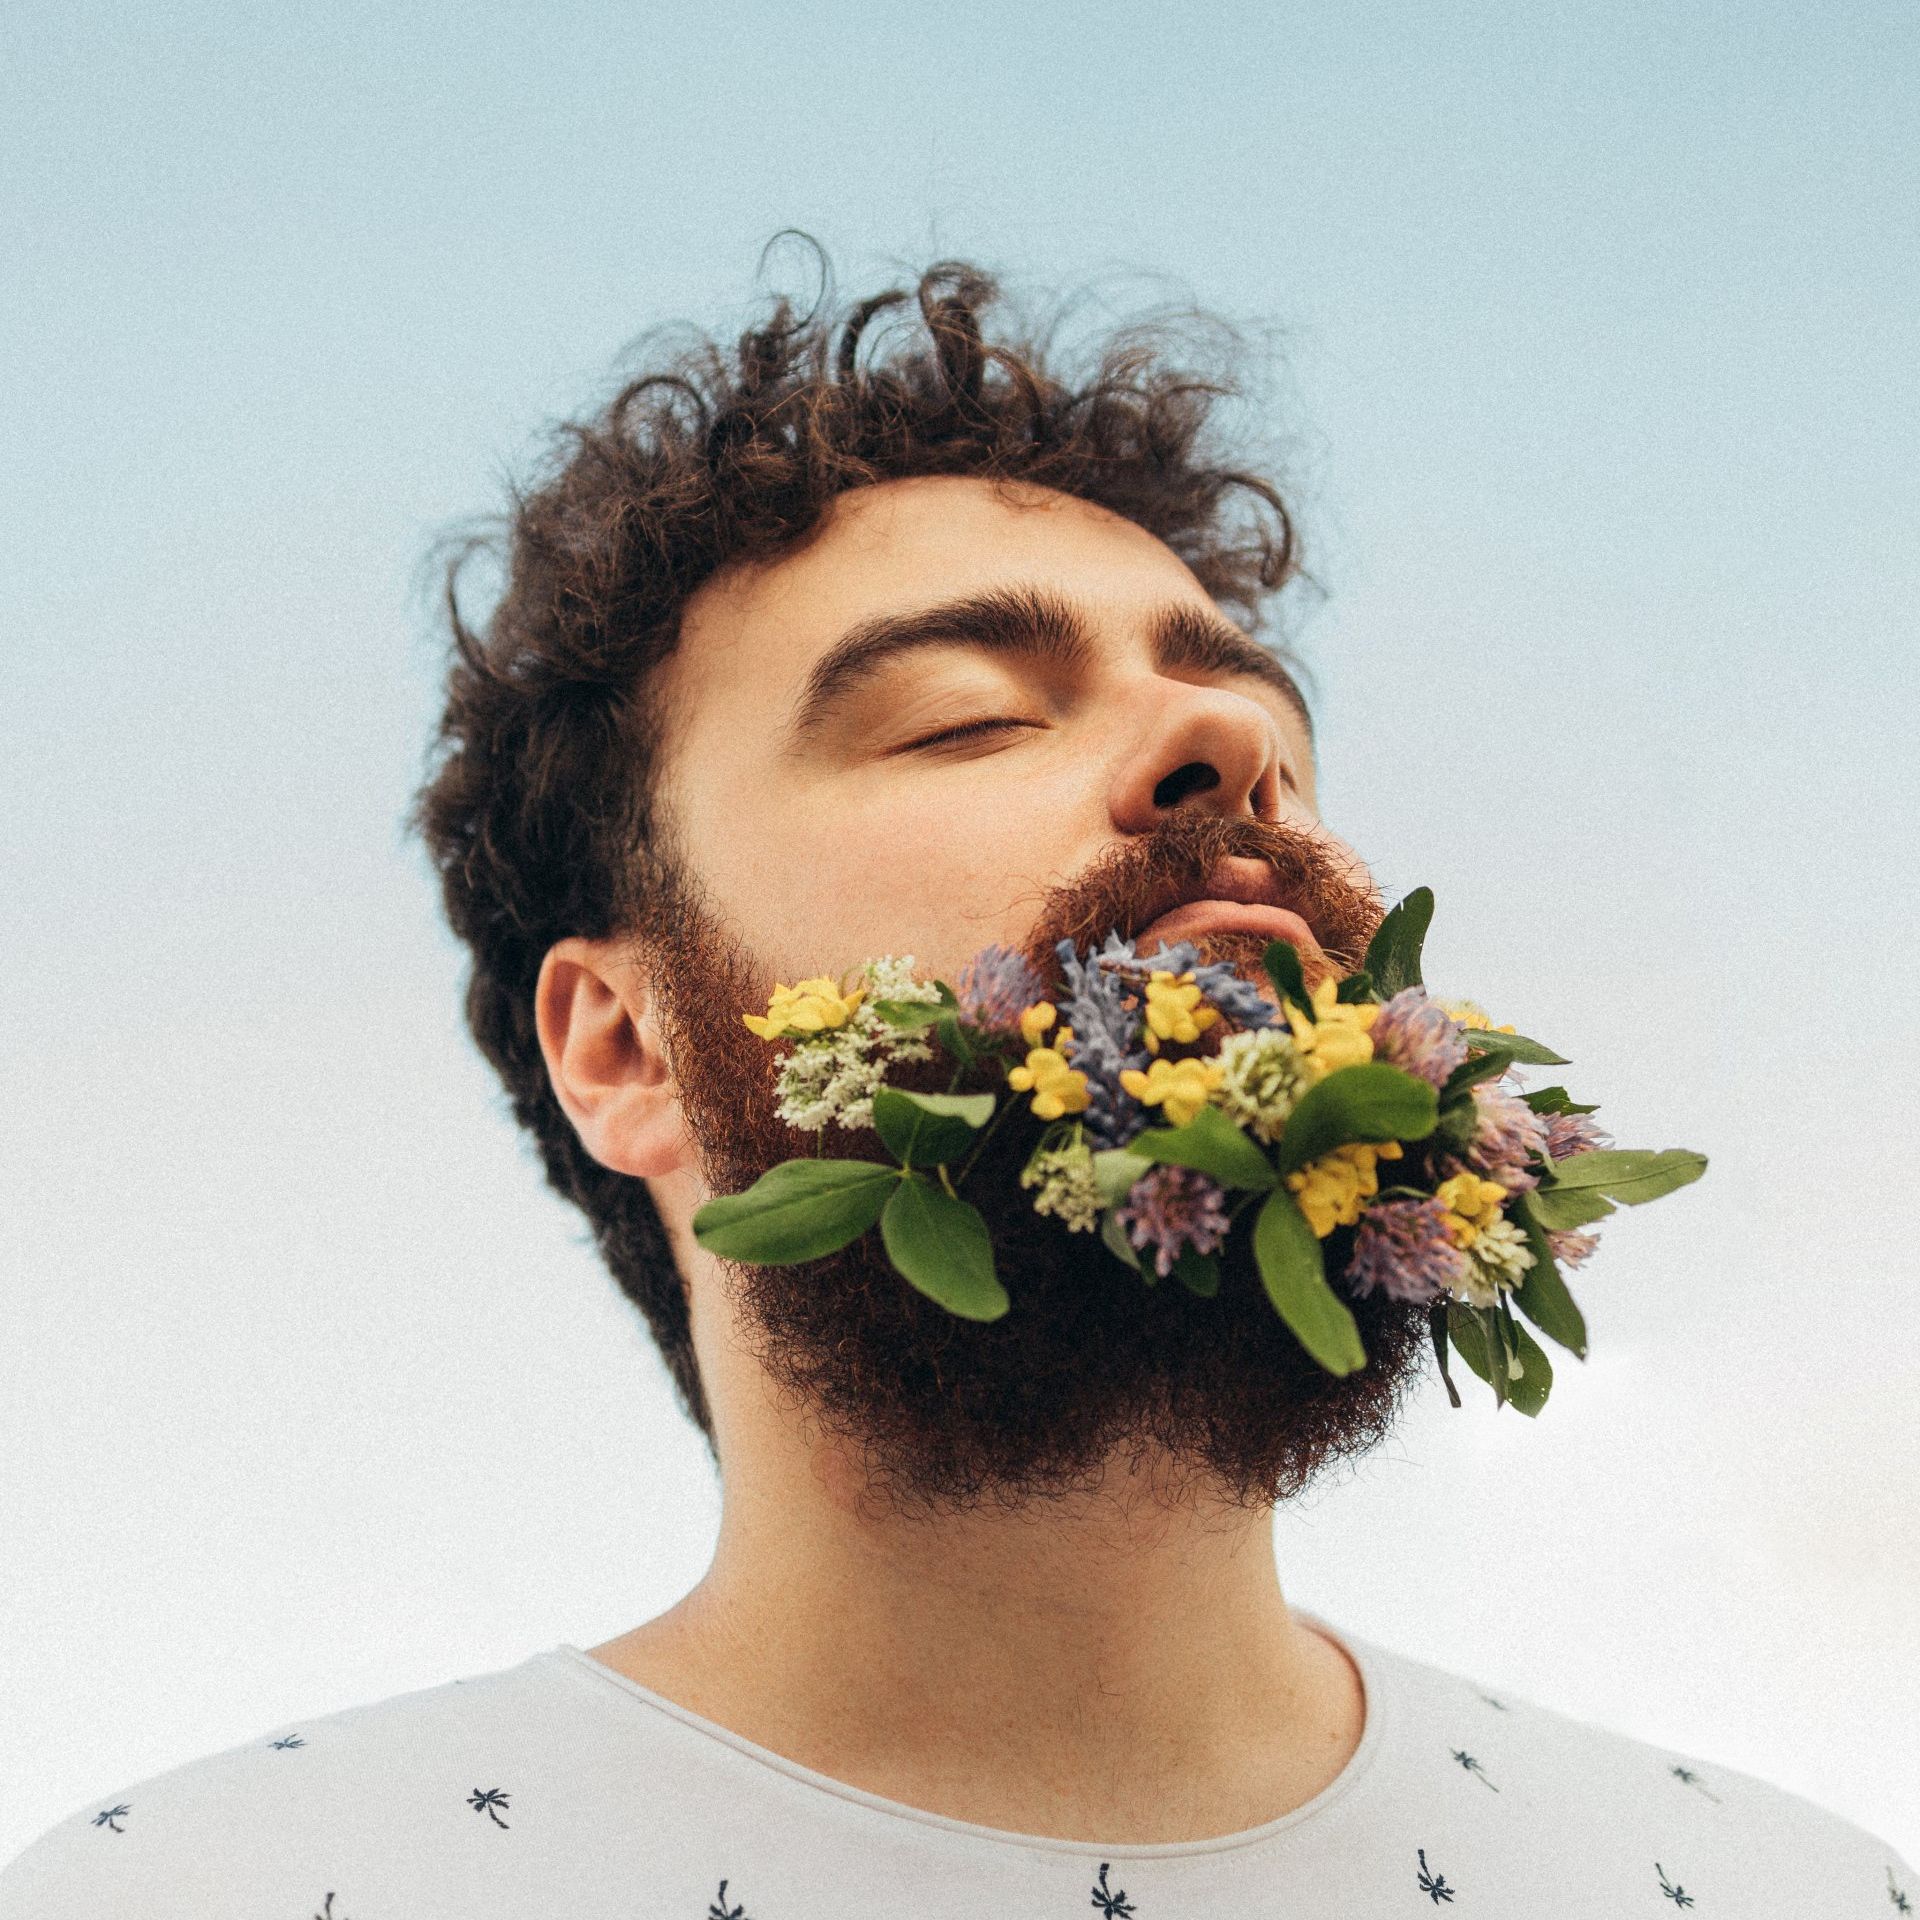 A man with a beard has flowers in his mouth